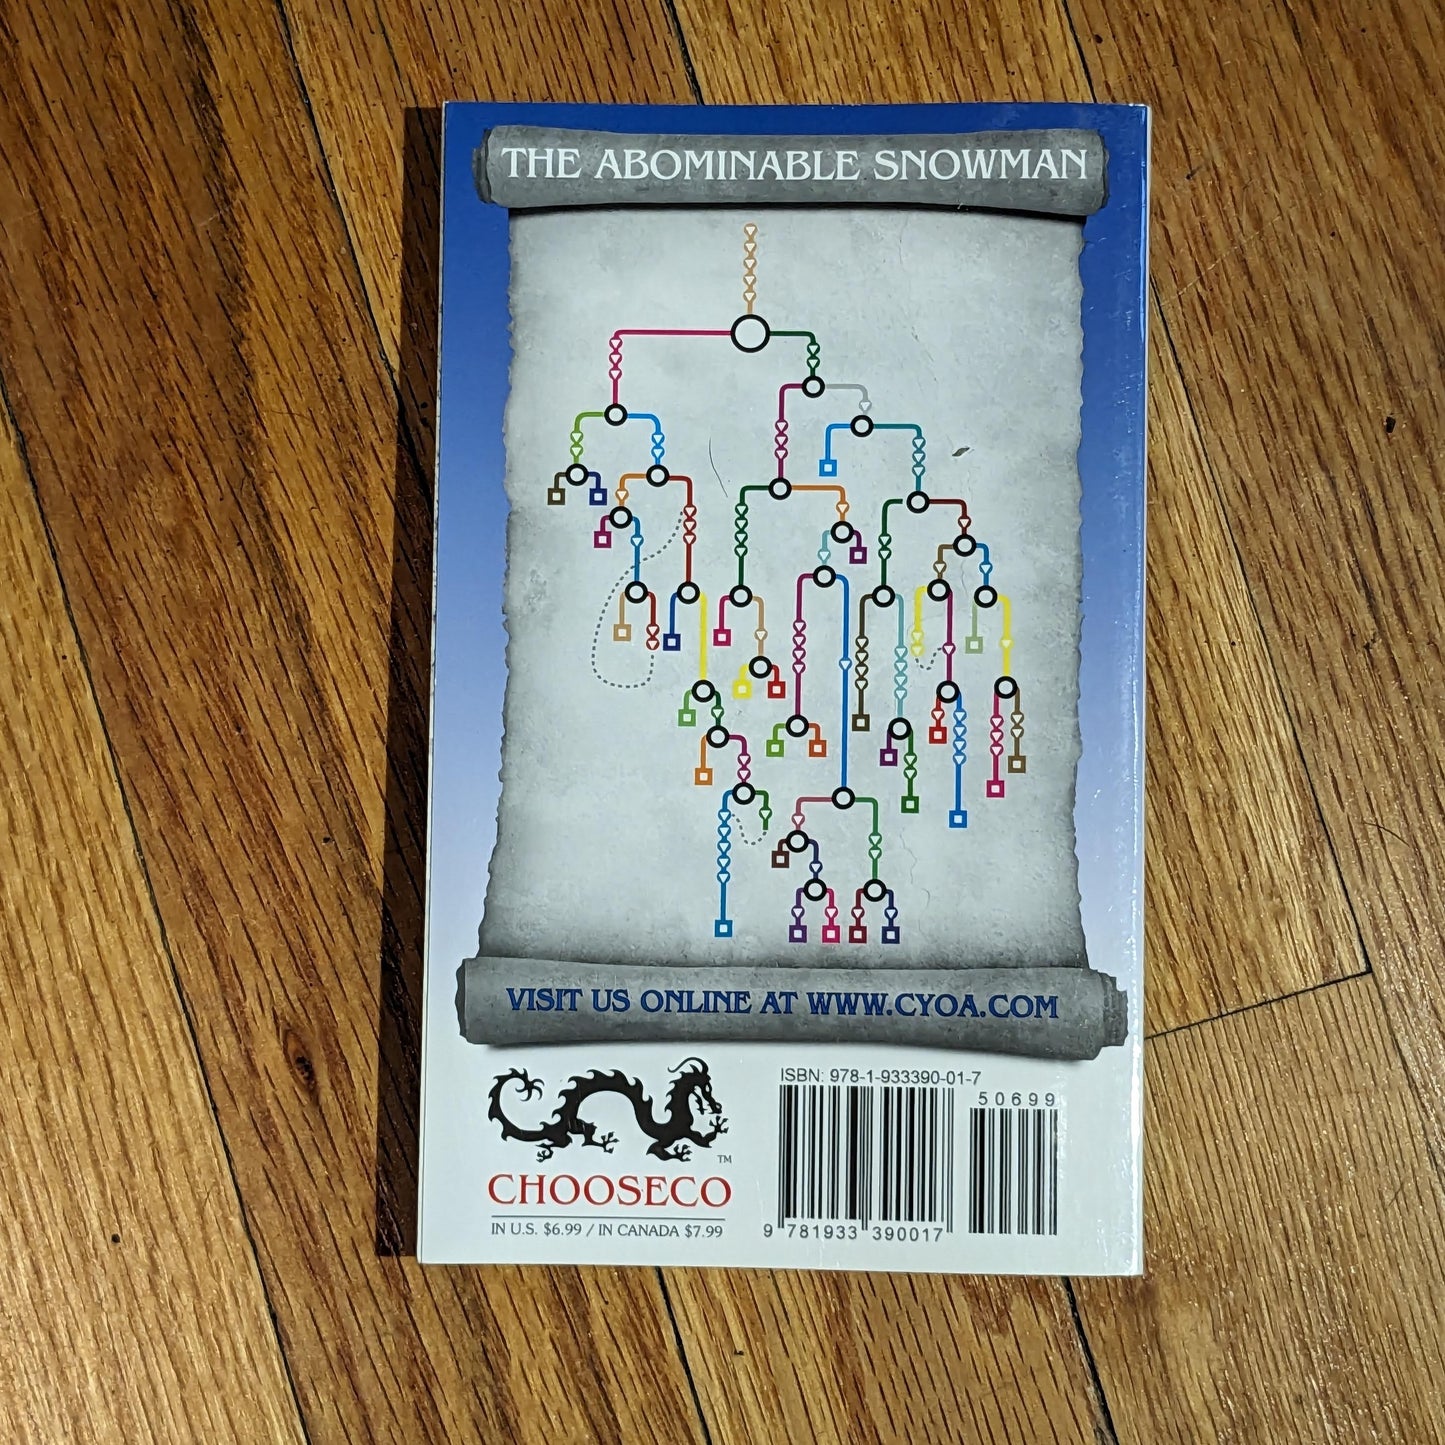 Abominable Snowman, The (Choose Your Own Adventure #1) by R. A. Montgomery - Asylum Books